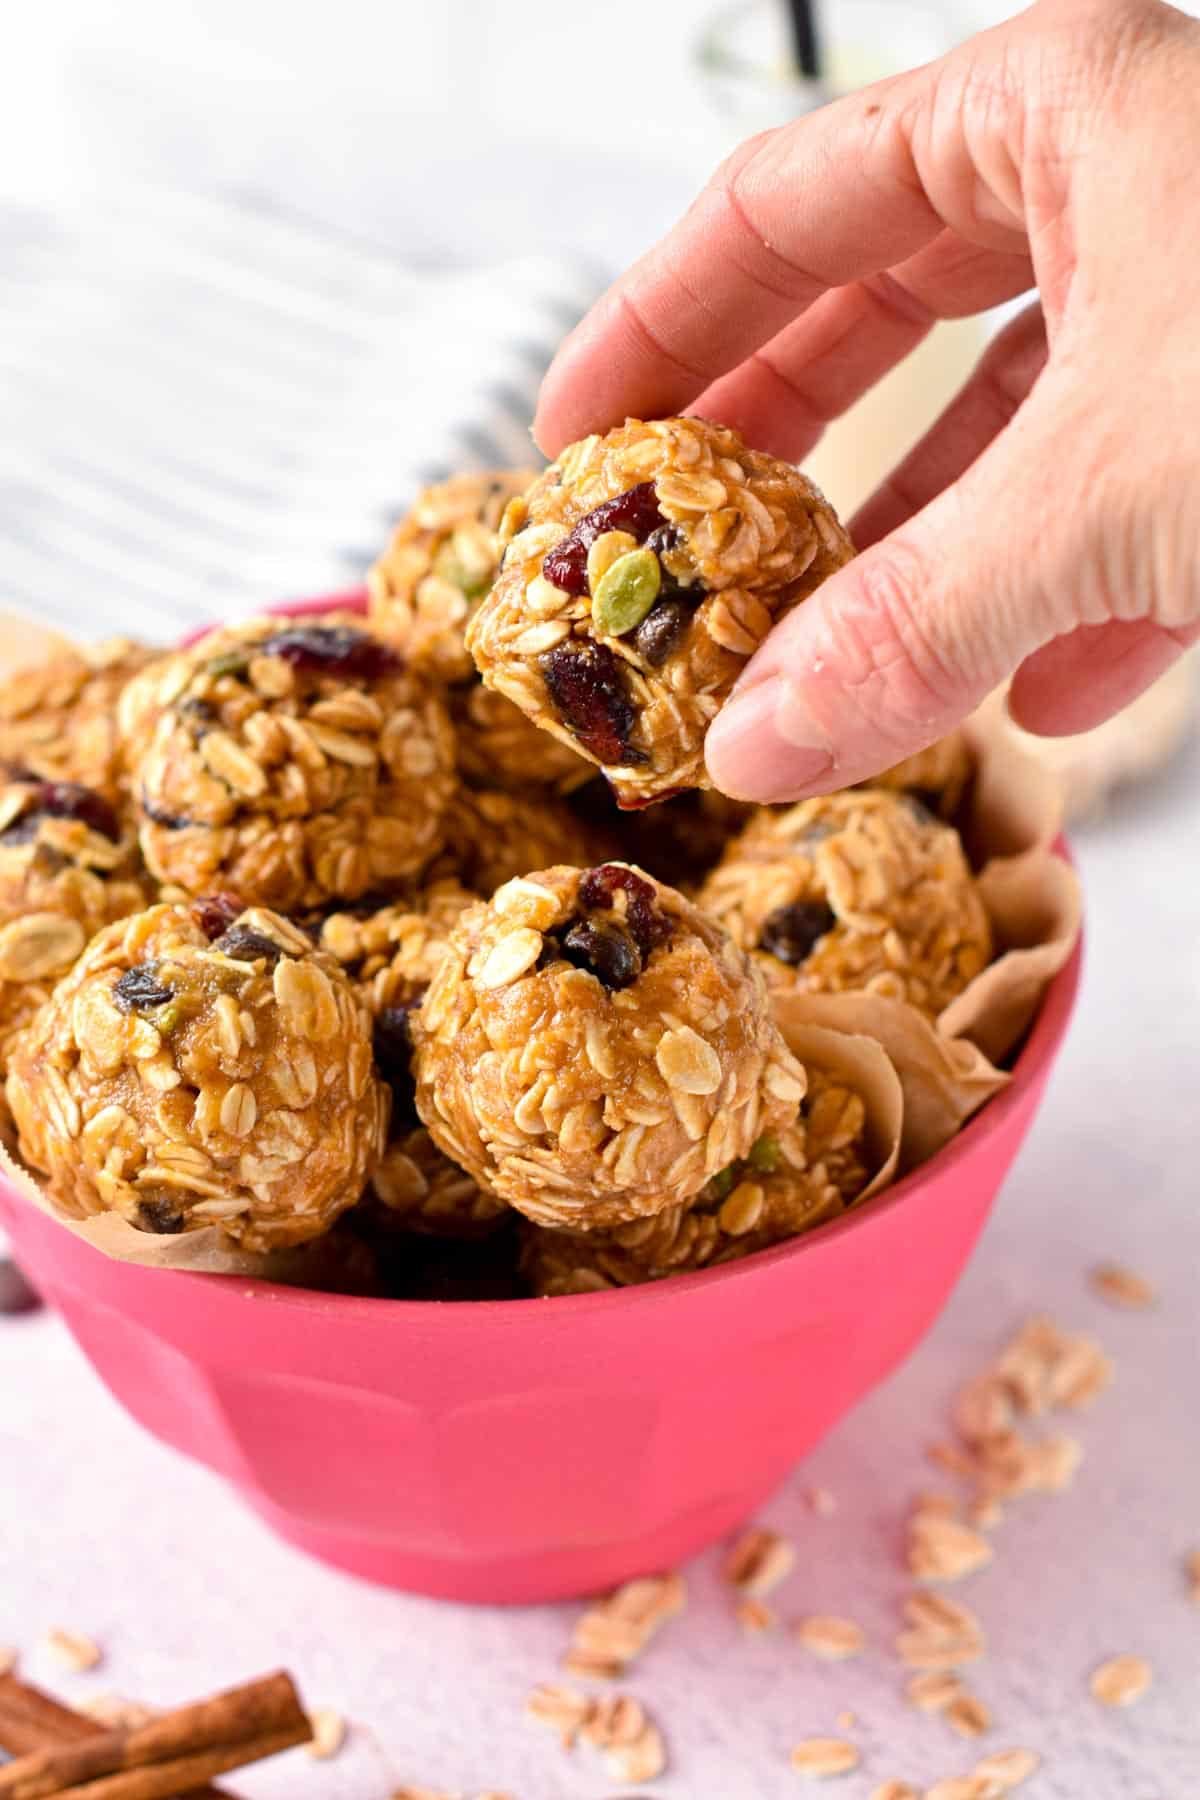 These No Bake Peanut Butter Oatmeal Balls are easy, healthy and quick snacks to fix your sweet cravings and adds fiber, proteins to your day. Plus, these no bake oatmeal balls takes barely 20 minutes to make and they are allergy friendly, vegan and dairy-free too.